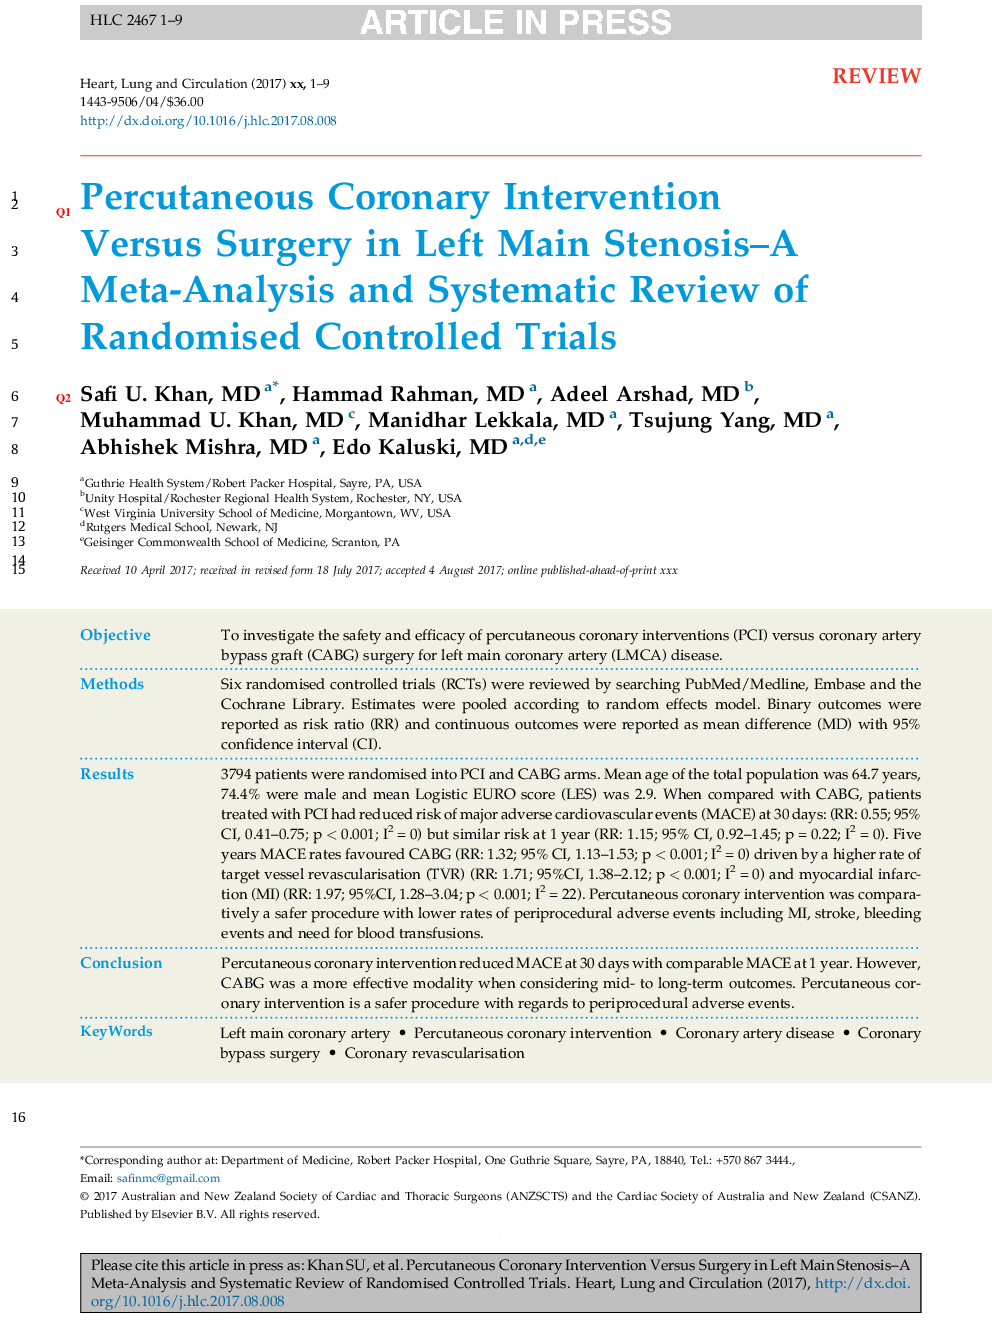 Percutaneous Coronary Intervention Versus Surgery in Left Main Stenosis-A Meta-Analysis and Systematic Review of Randomised Controlled Trials